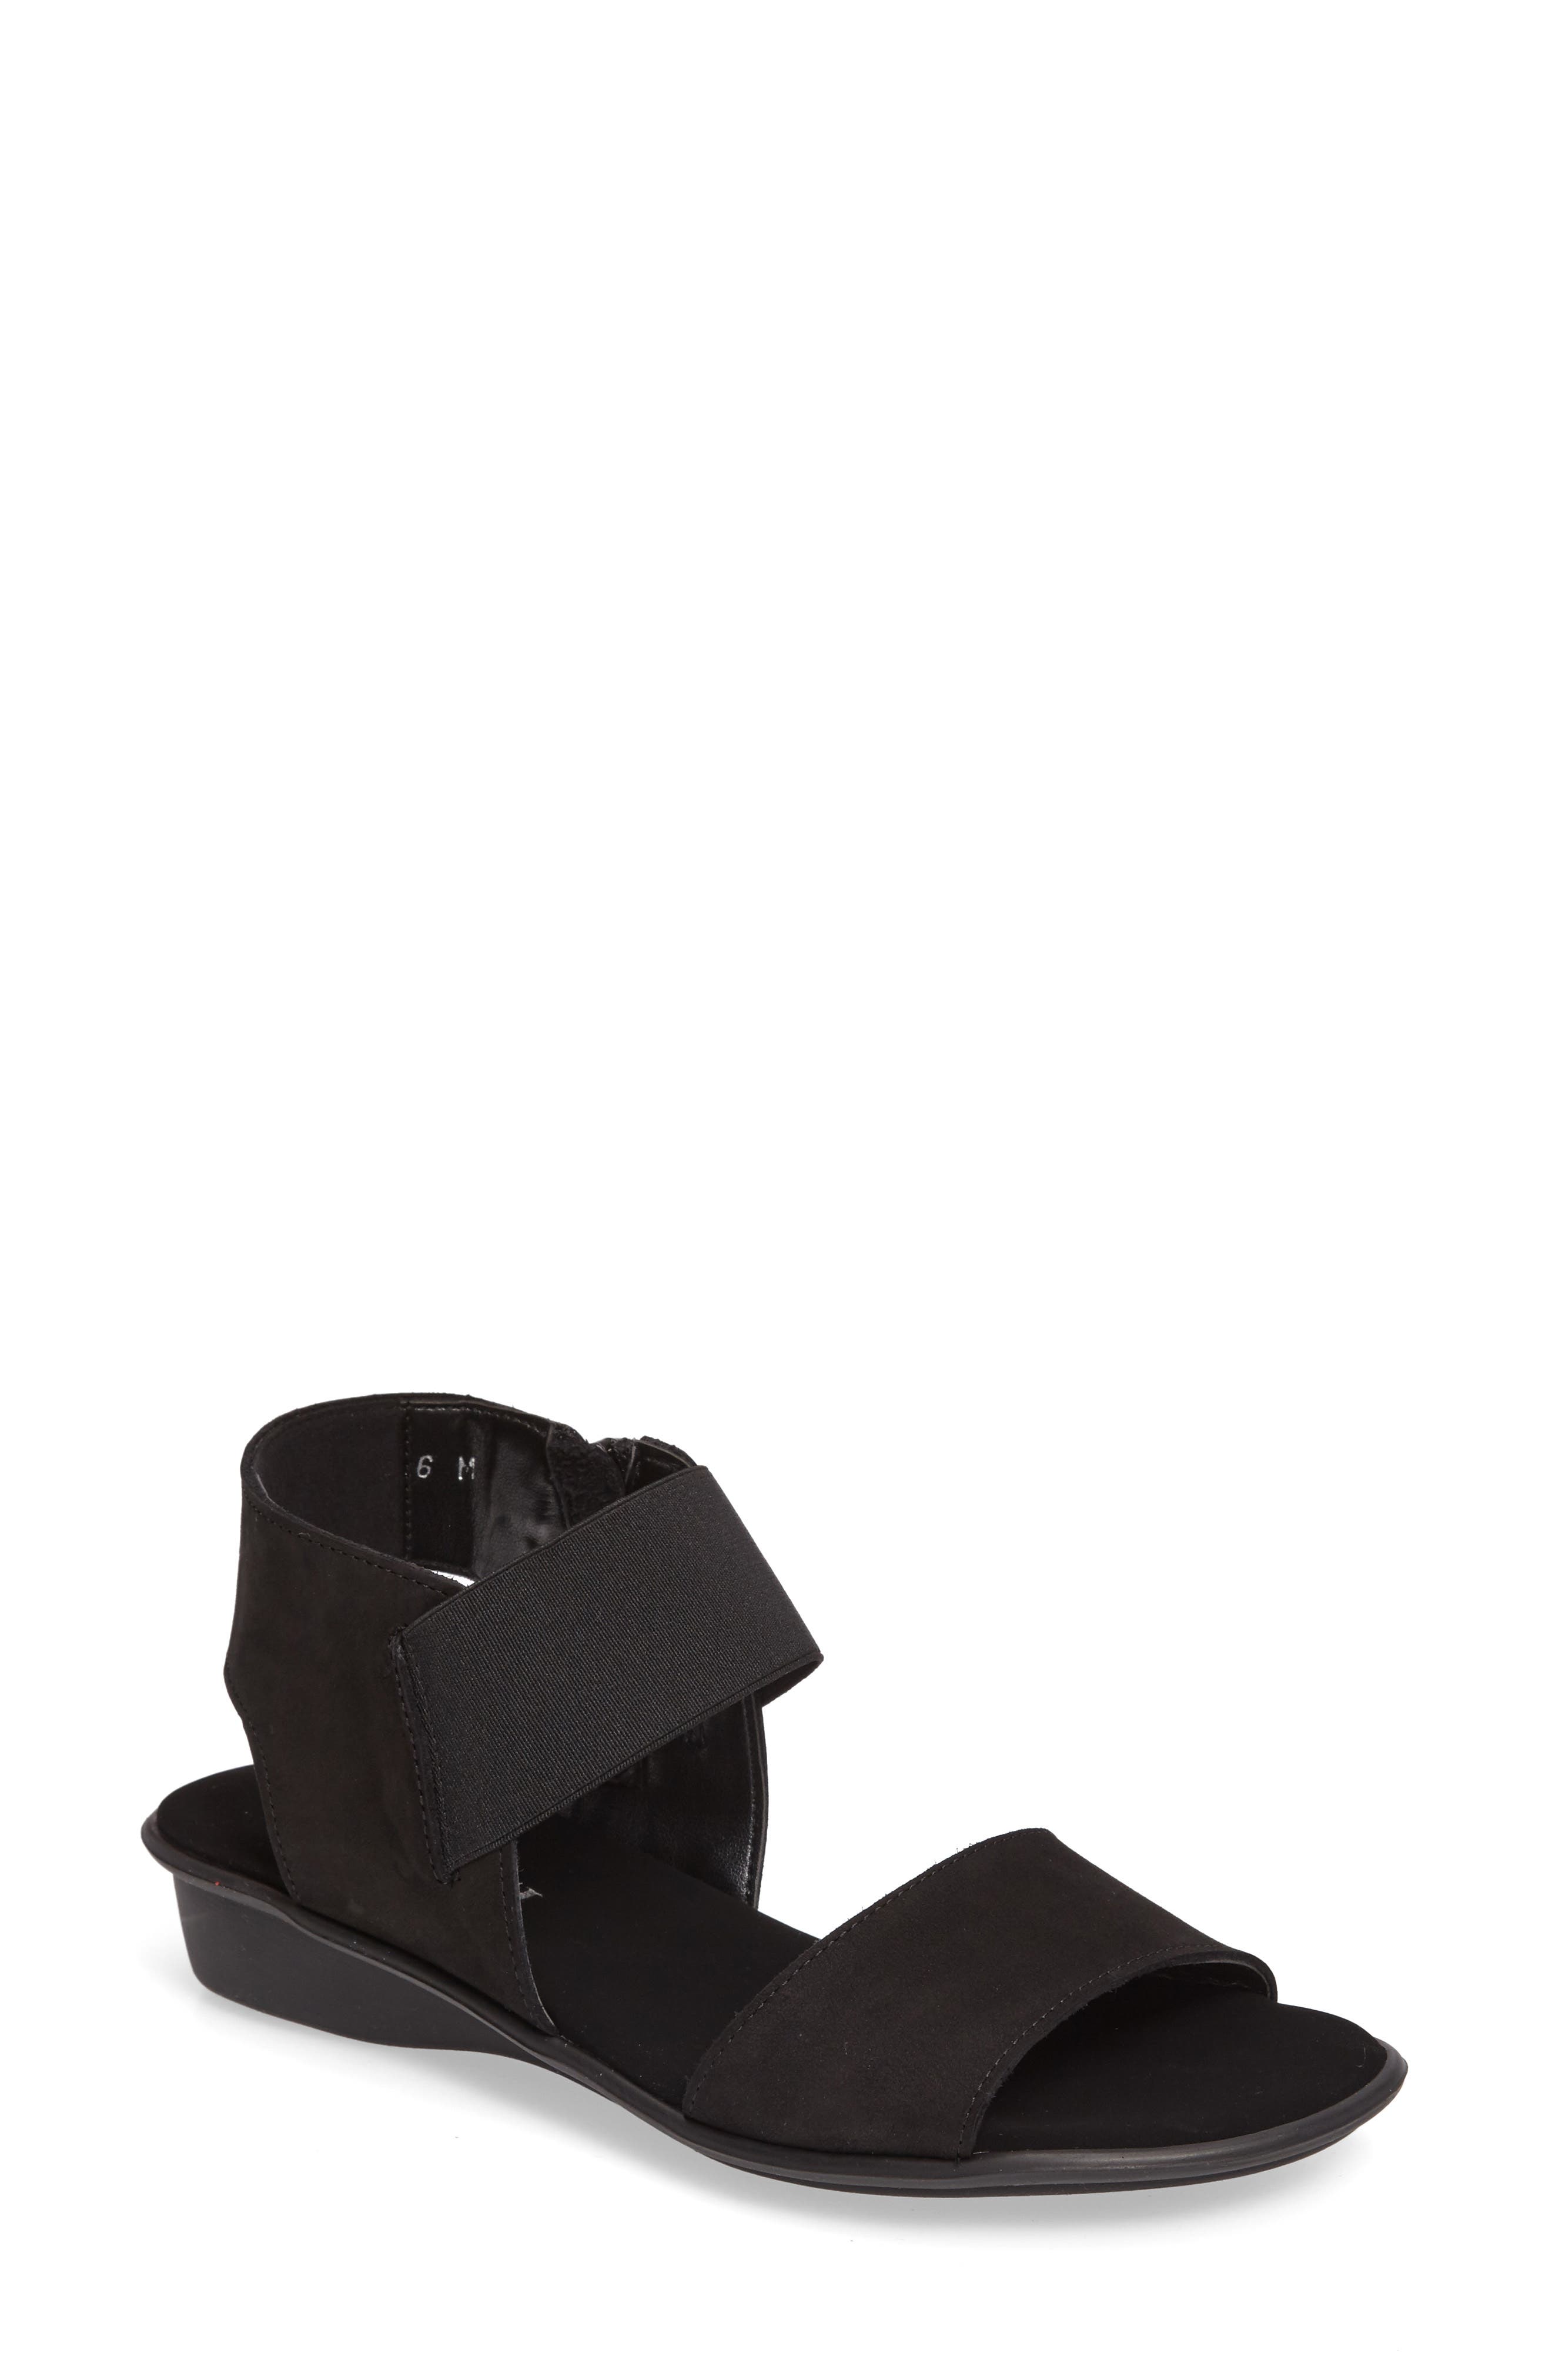 UPC 735988161862 product image for Sesto Meucci Eirlys Sandal in Black Leather at Nordstrom, Size 8.5 | upcitemdb.com